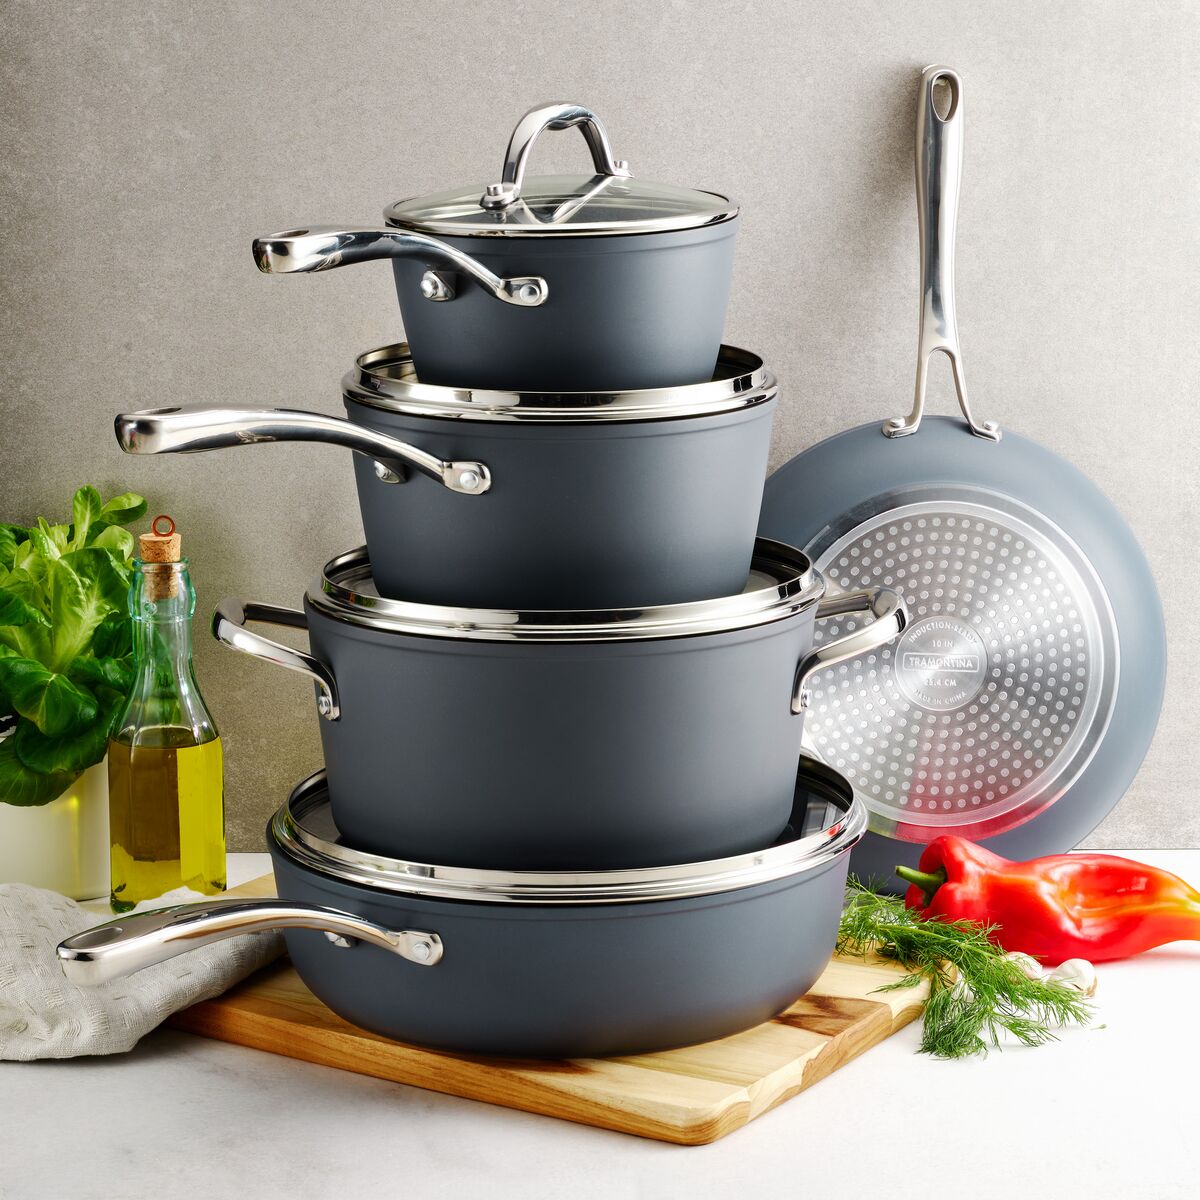 Tramontina 9 Pc Induction Nonstick Cookware Set - Slate Gray - $99.96